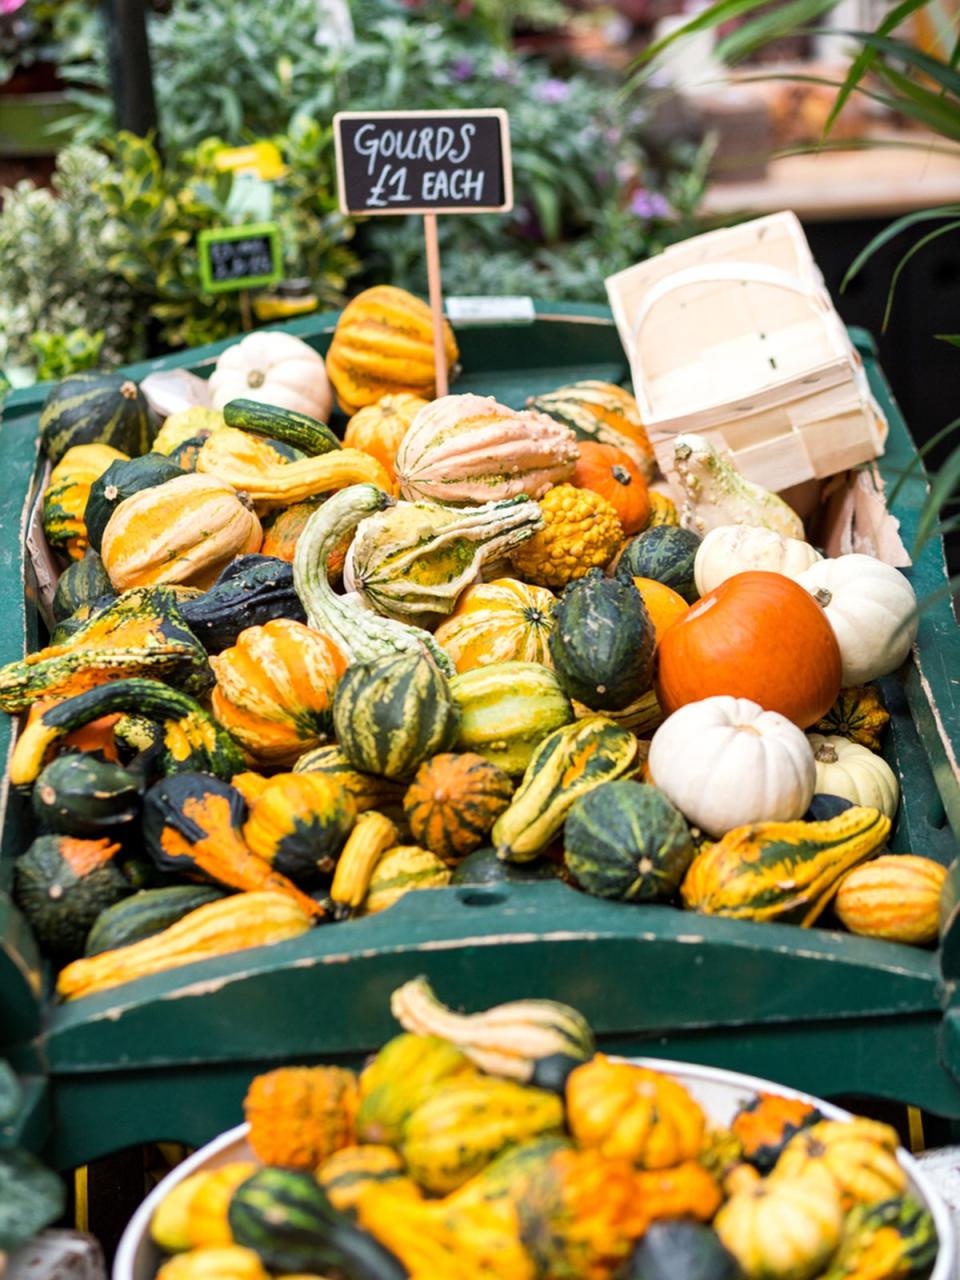 The comedic sight of squashes piled high is typical at this time of year (Getty/iStock)